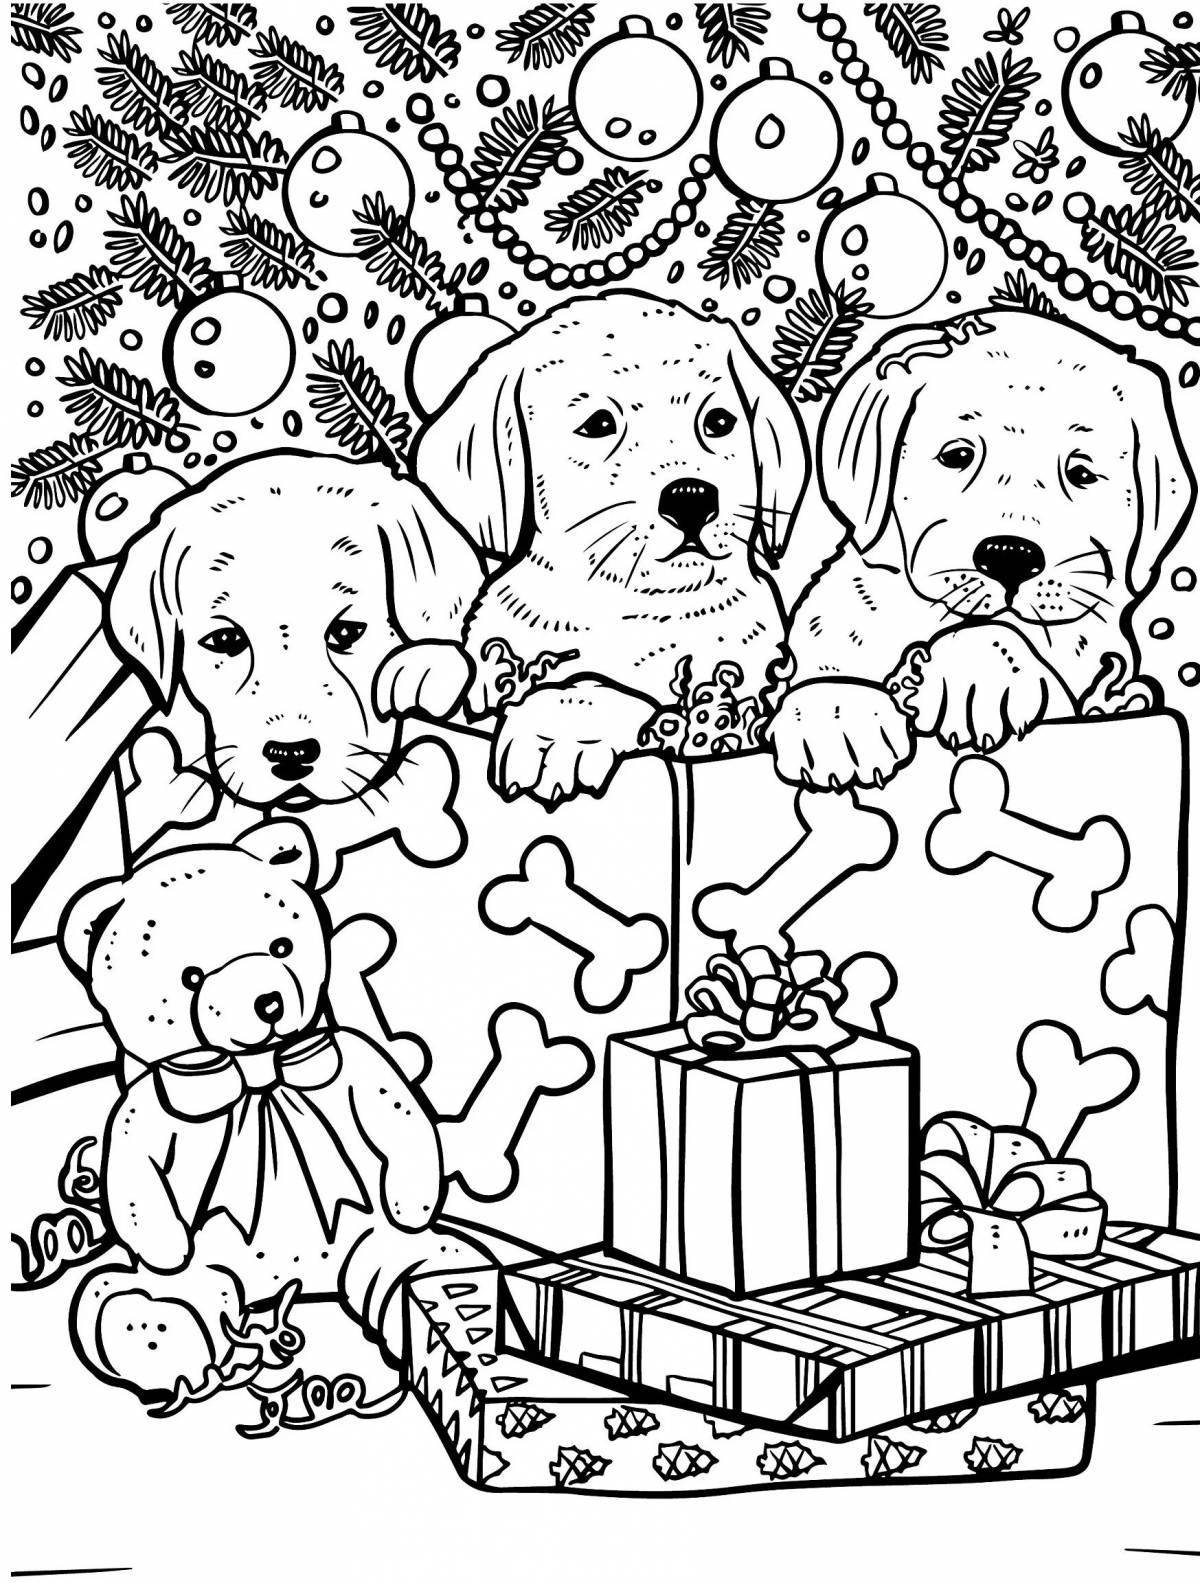 Christmas holiday coloring book for teens